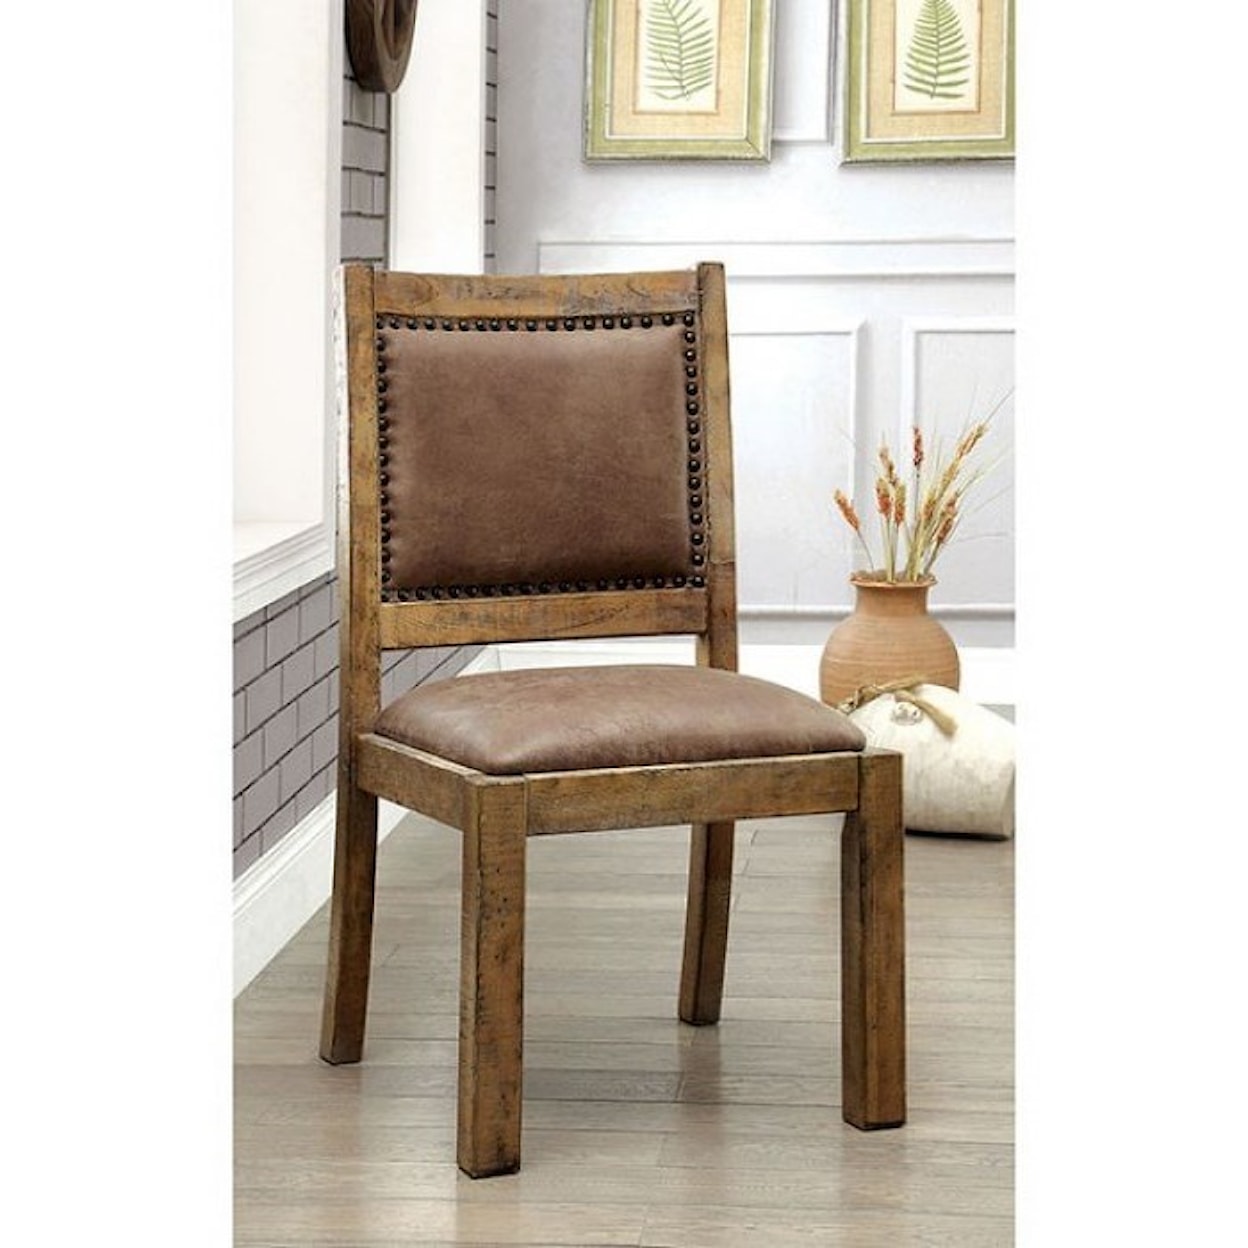 FUSA Gianna Side Chair, 2 Pack